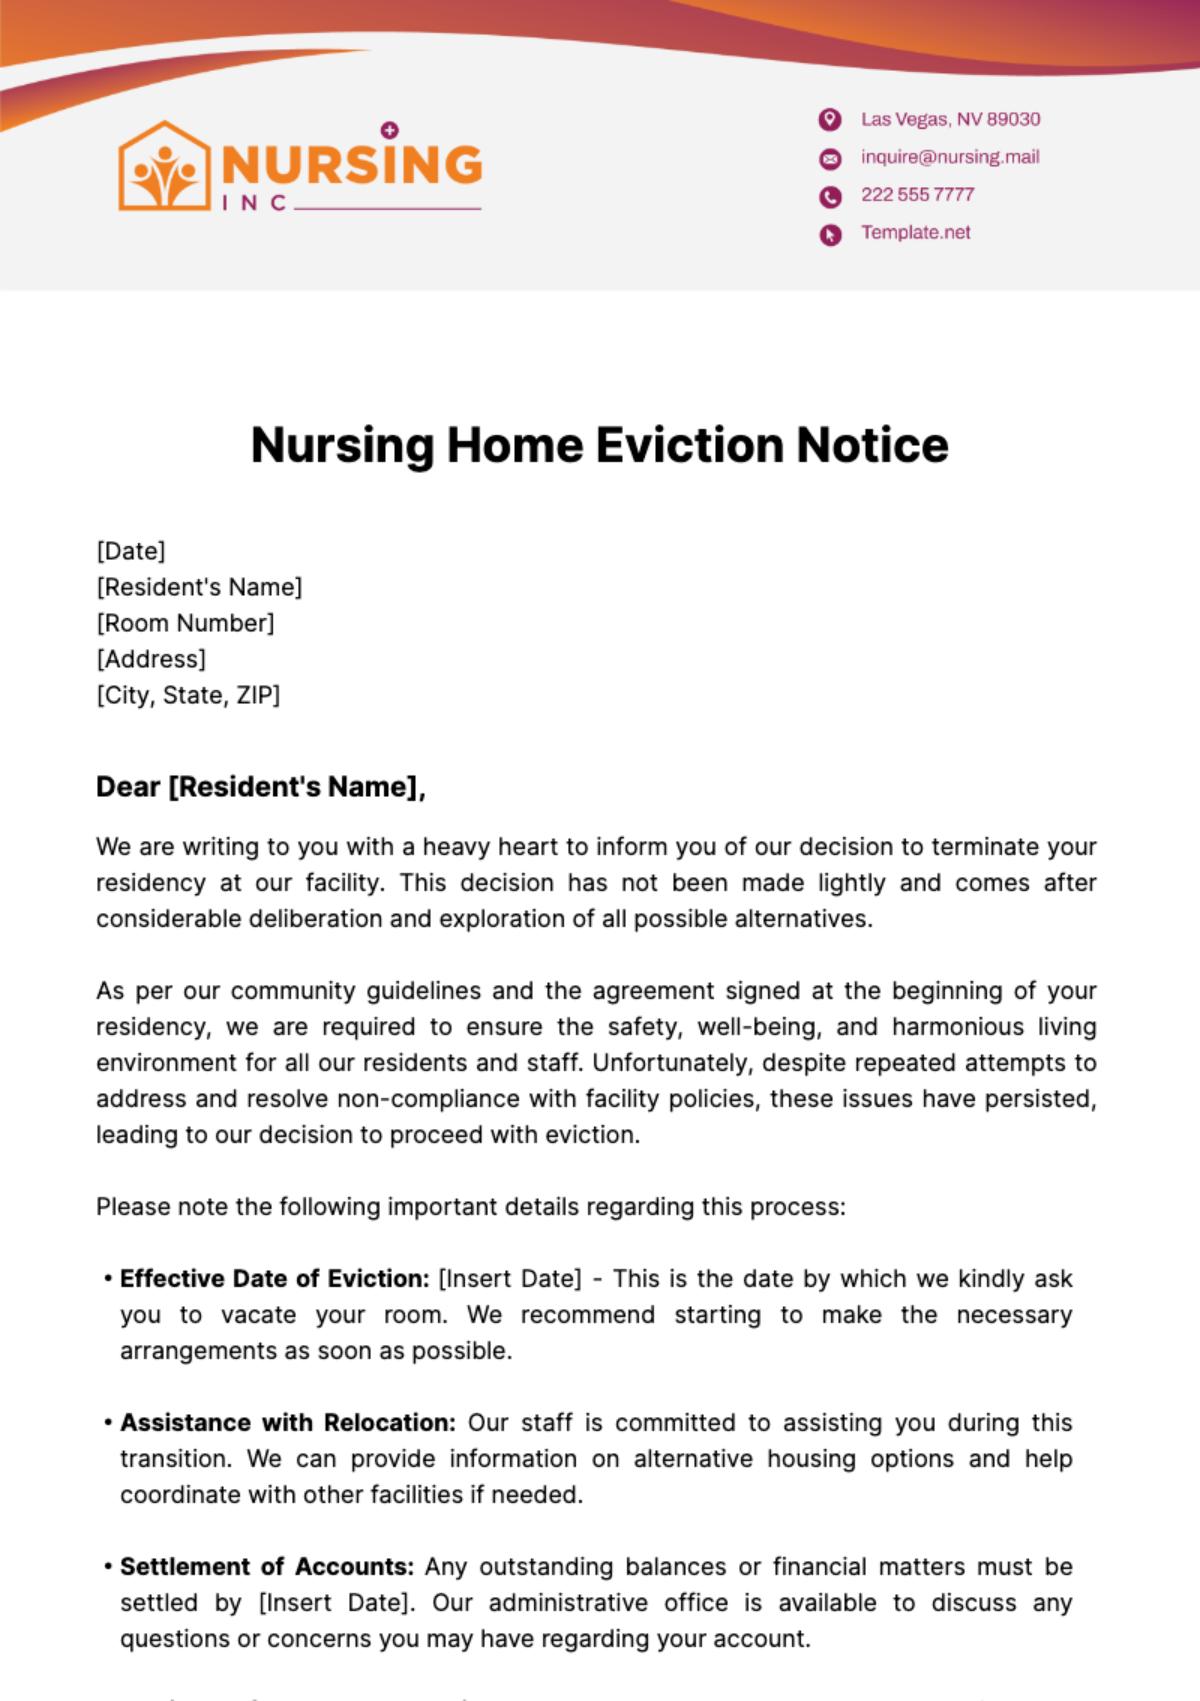 Nursing Home Eviction Notice Template